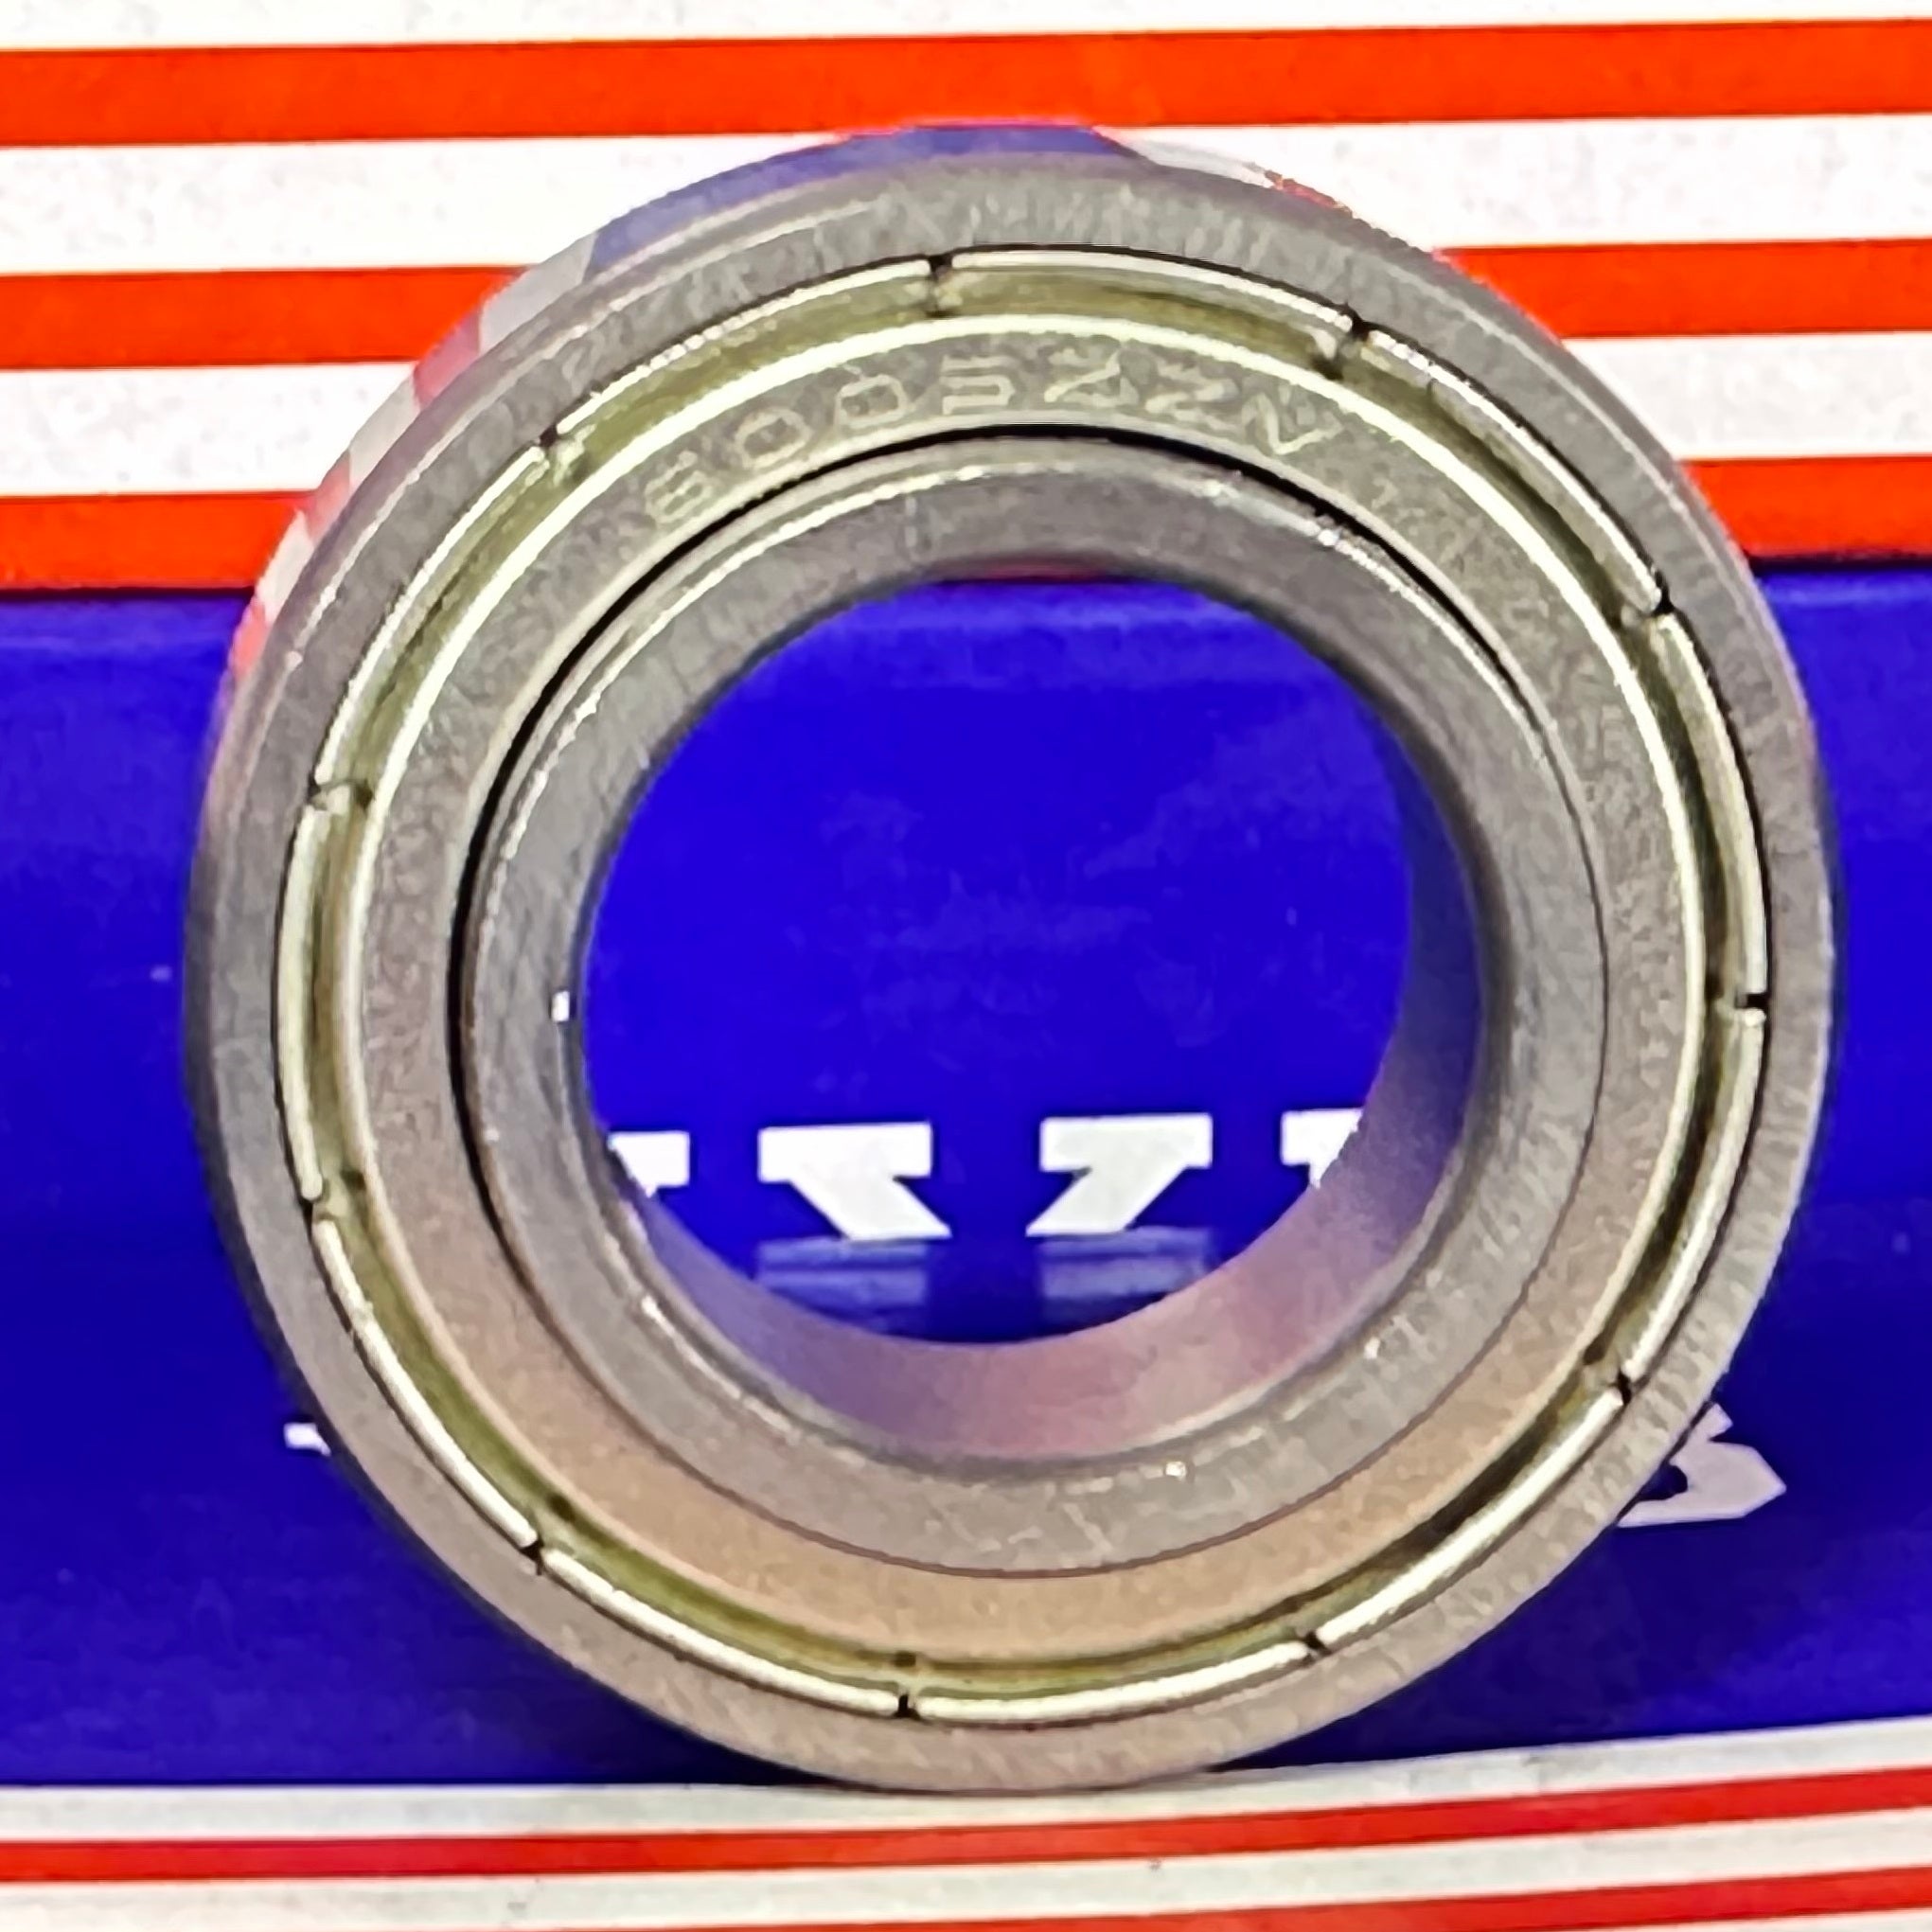 EX6005ZZ Ball Bearing with extended ring on one side 25x47x12/15mm 